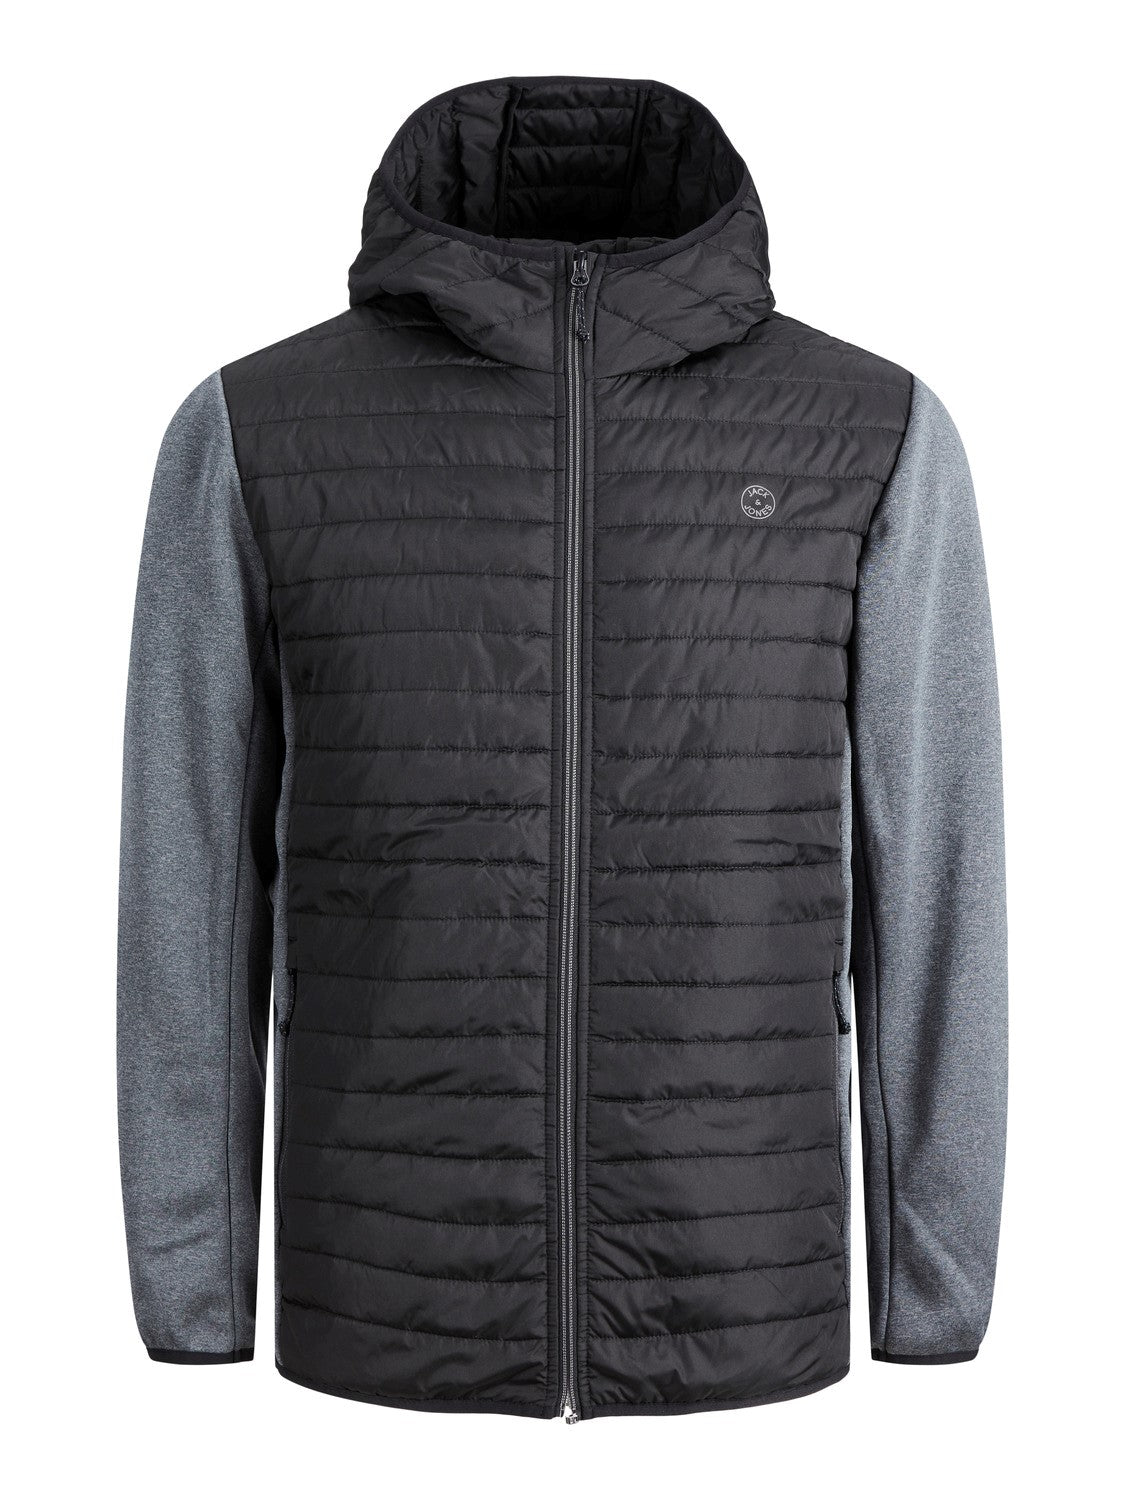 Multi Quilted Light Jacket Black/Grey-Front view